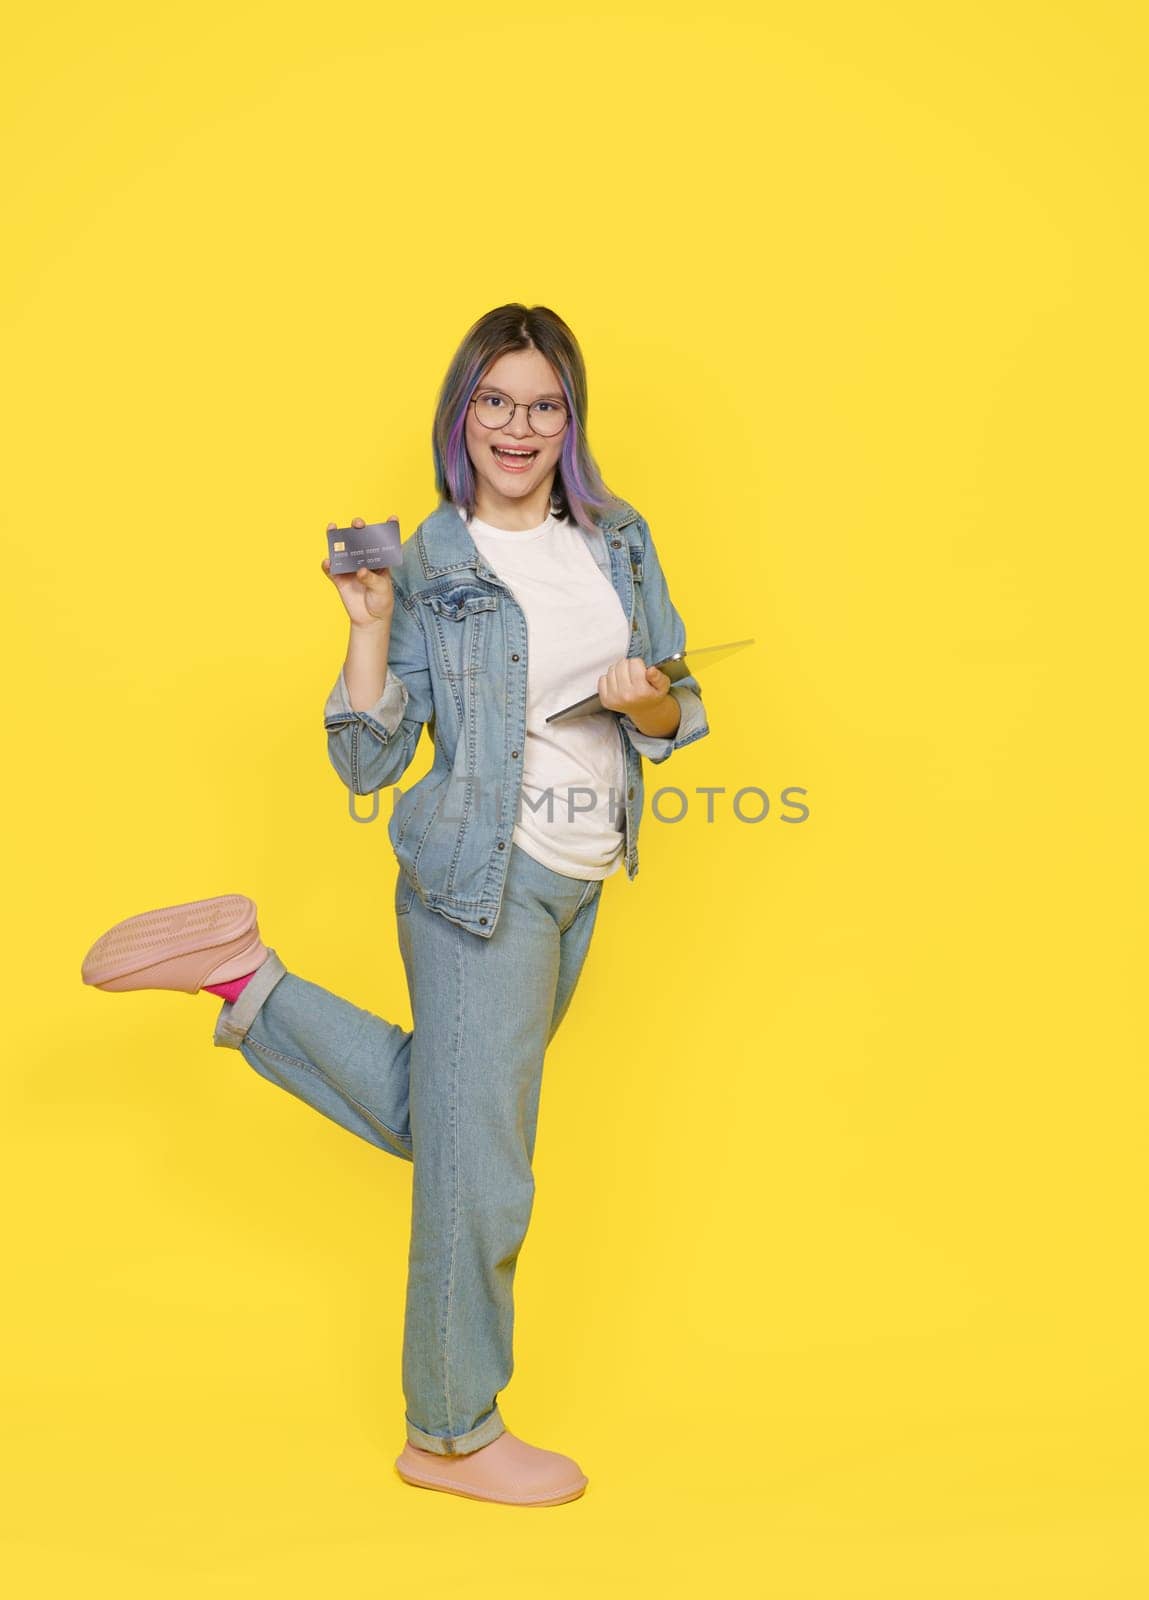 Happy Customer Show A Bank Credit Card, Ready To Make Purchase Online In Web Store From Tablet Pc. Girl In Casual Closes Isolated On Yellow by LipikStockMedia